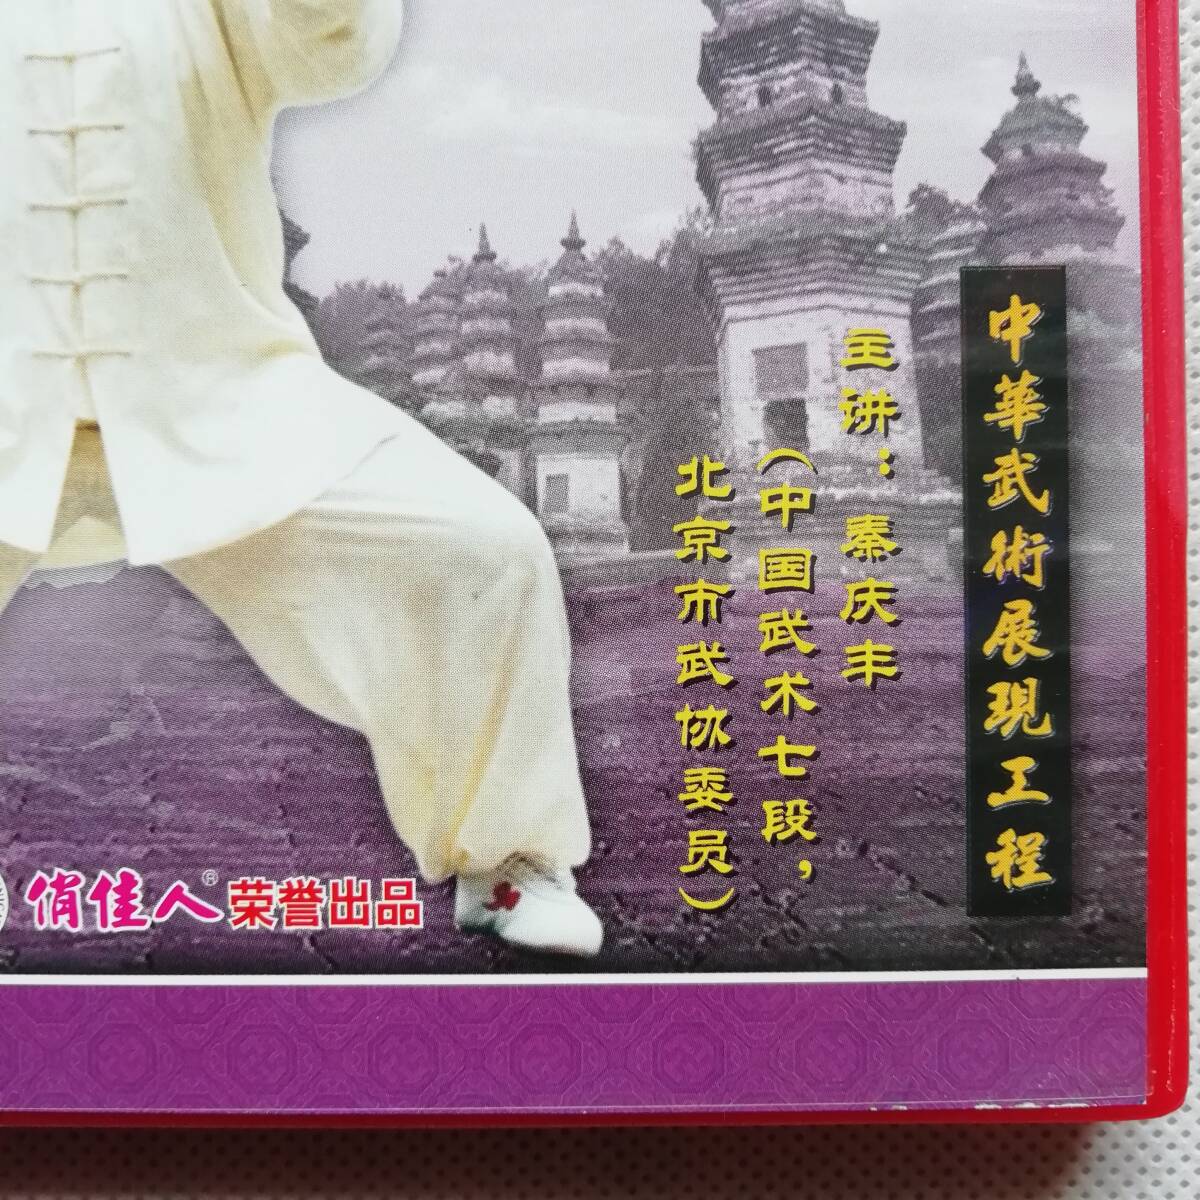  north . little .. mountain . Chinese .. exhibition reality . degree VCD video CD person . physical training sound image publish company China kenpo old .. budo [s200]